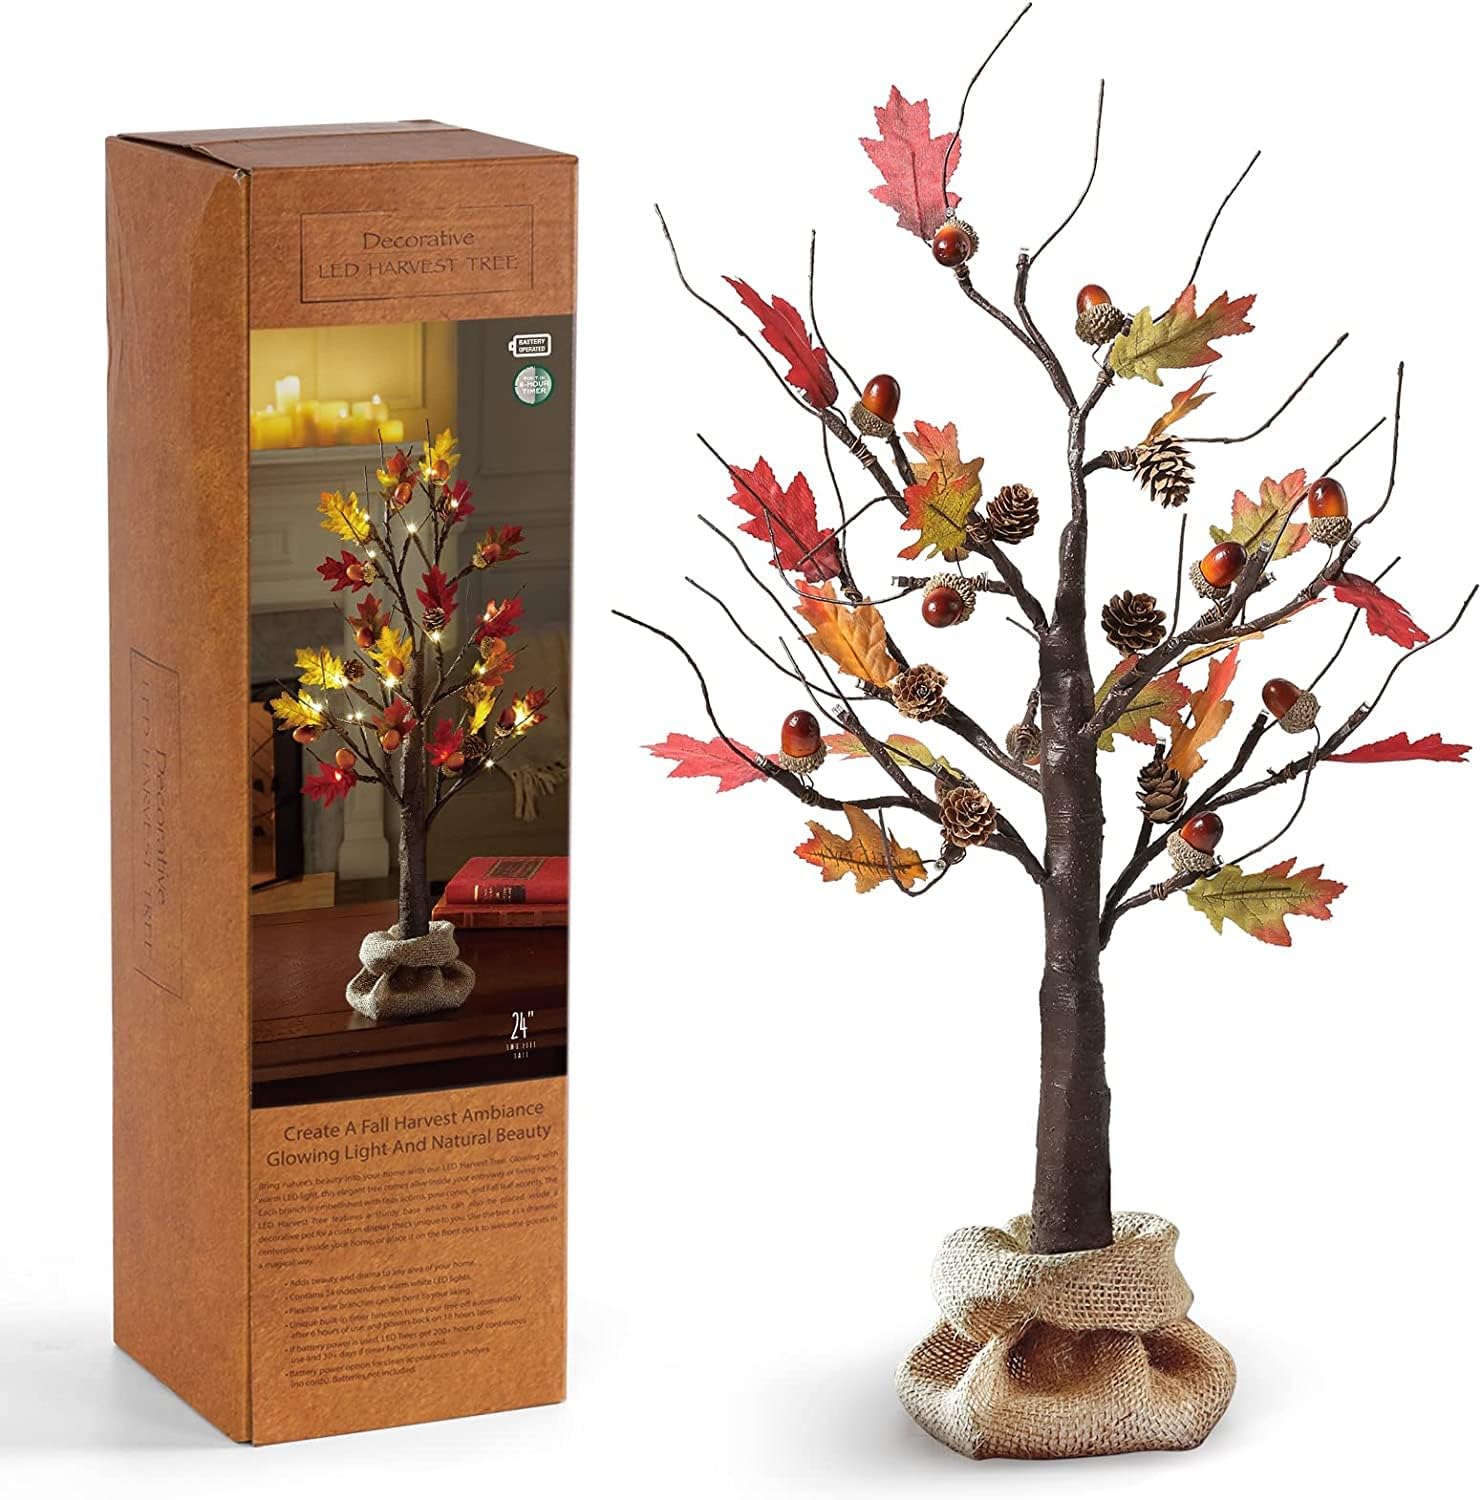 This tree is so cute! It has the cutest little acorns on it, and is definitely a good addition to Thanksgiving and fall decor. It also has an automatic timer for the lights that comes on every evening. I am very happy with my purchase.